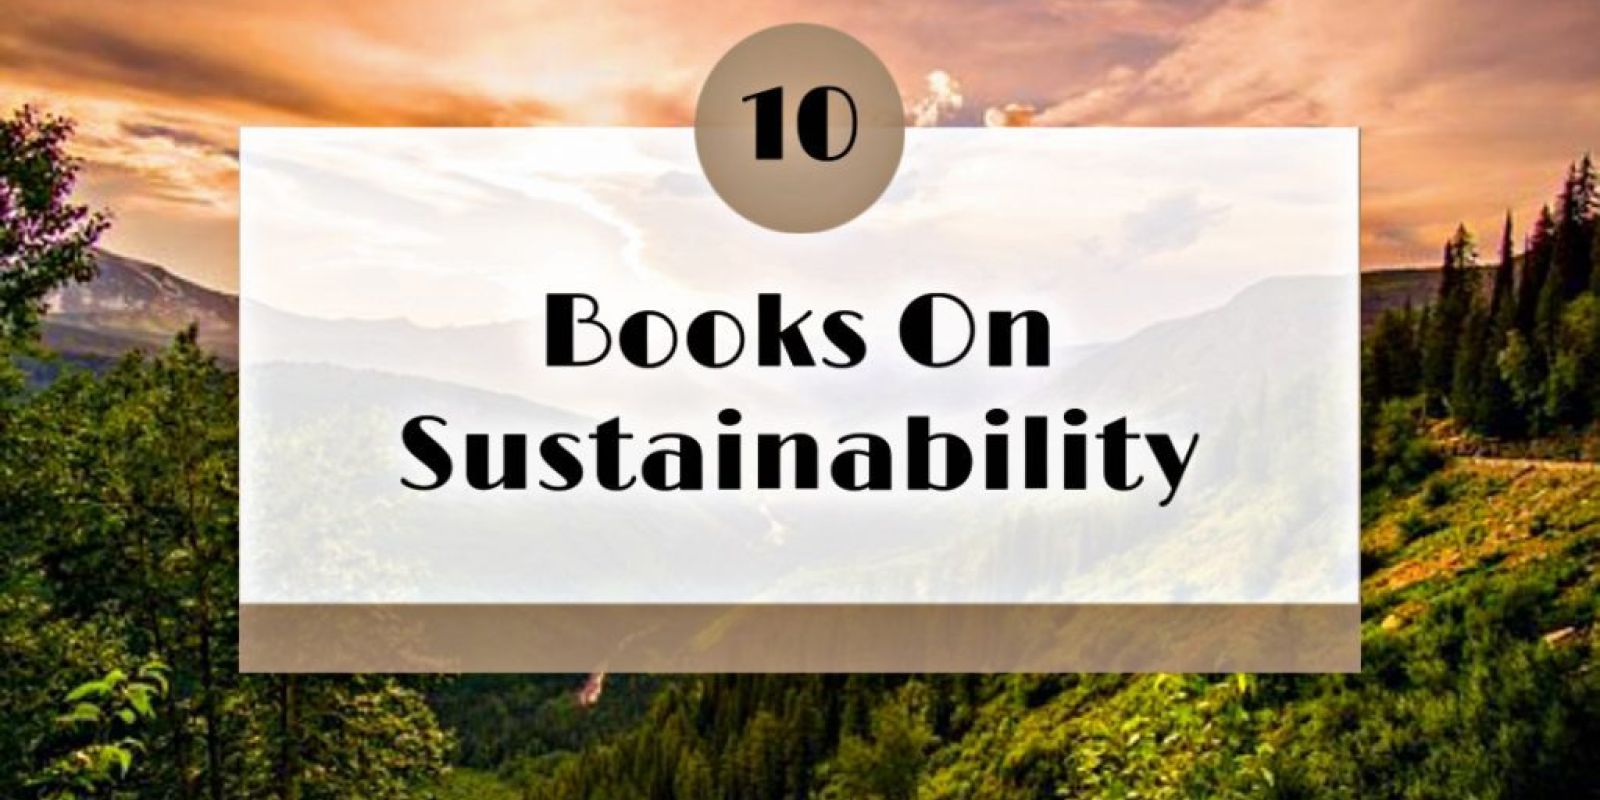 10 Must-Read Books On Sustainability Before 2021 Ends admin ajax.php?action=kernel&p=image&src=%7B%22file%22%3A%22wp content%2Fuploads%2F2021%2F06%2Fimage11 2 1024x677 1